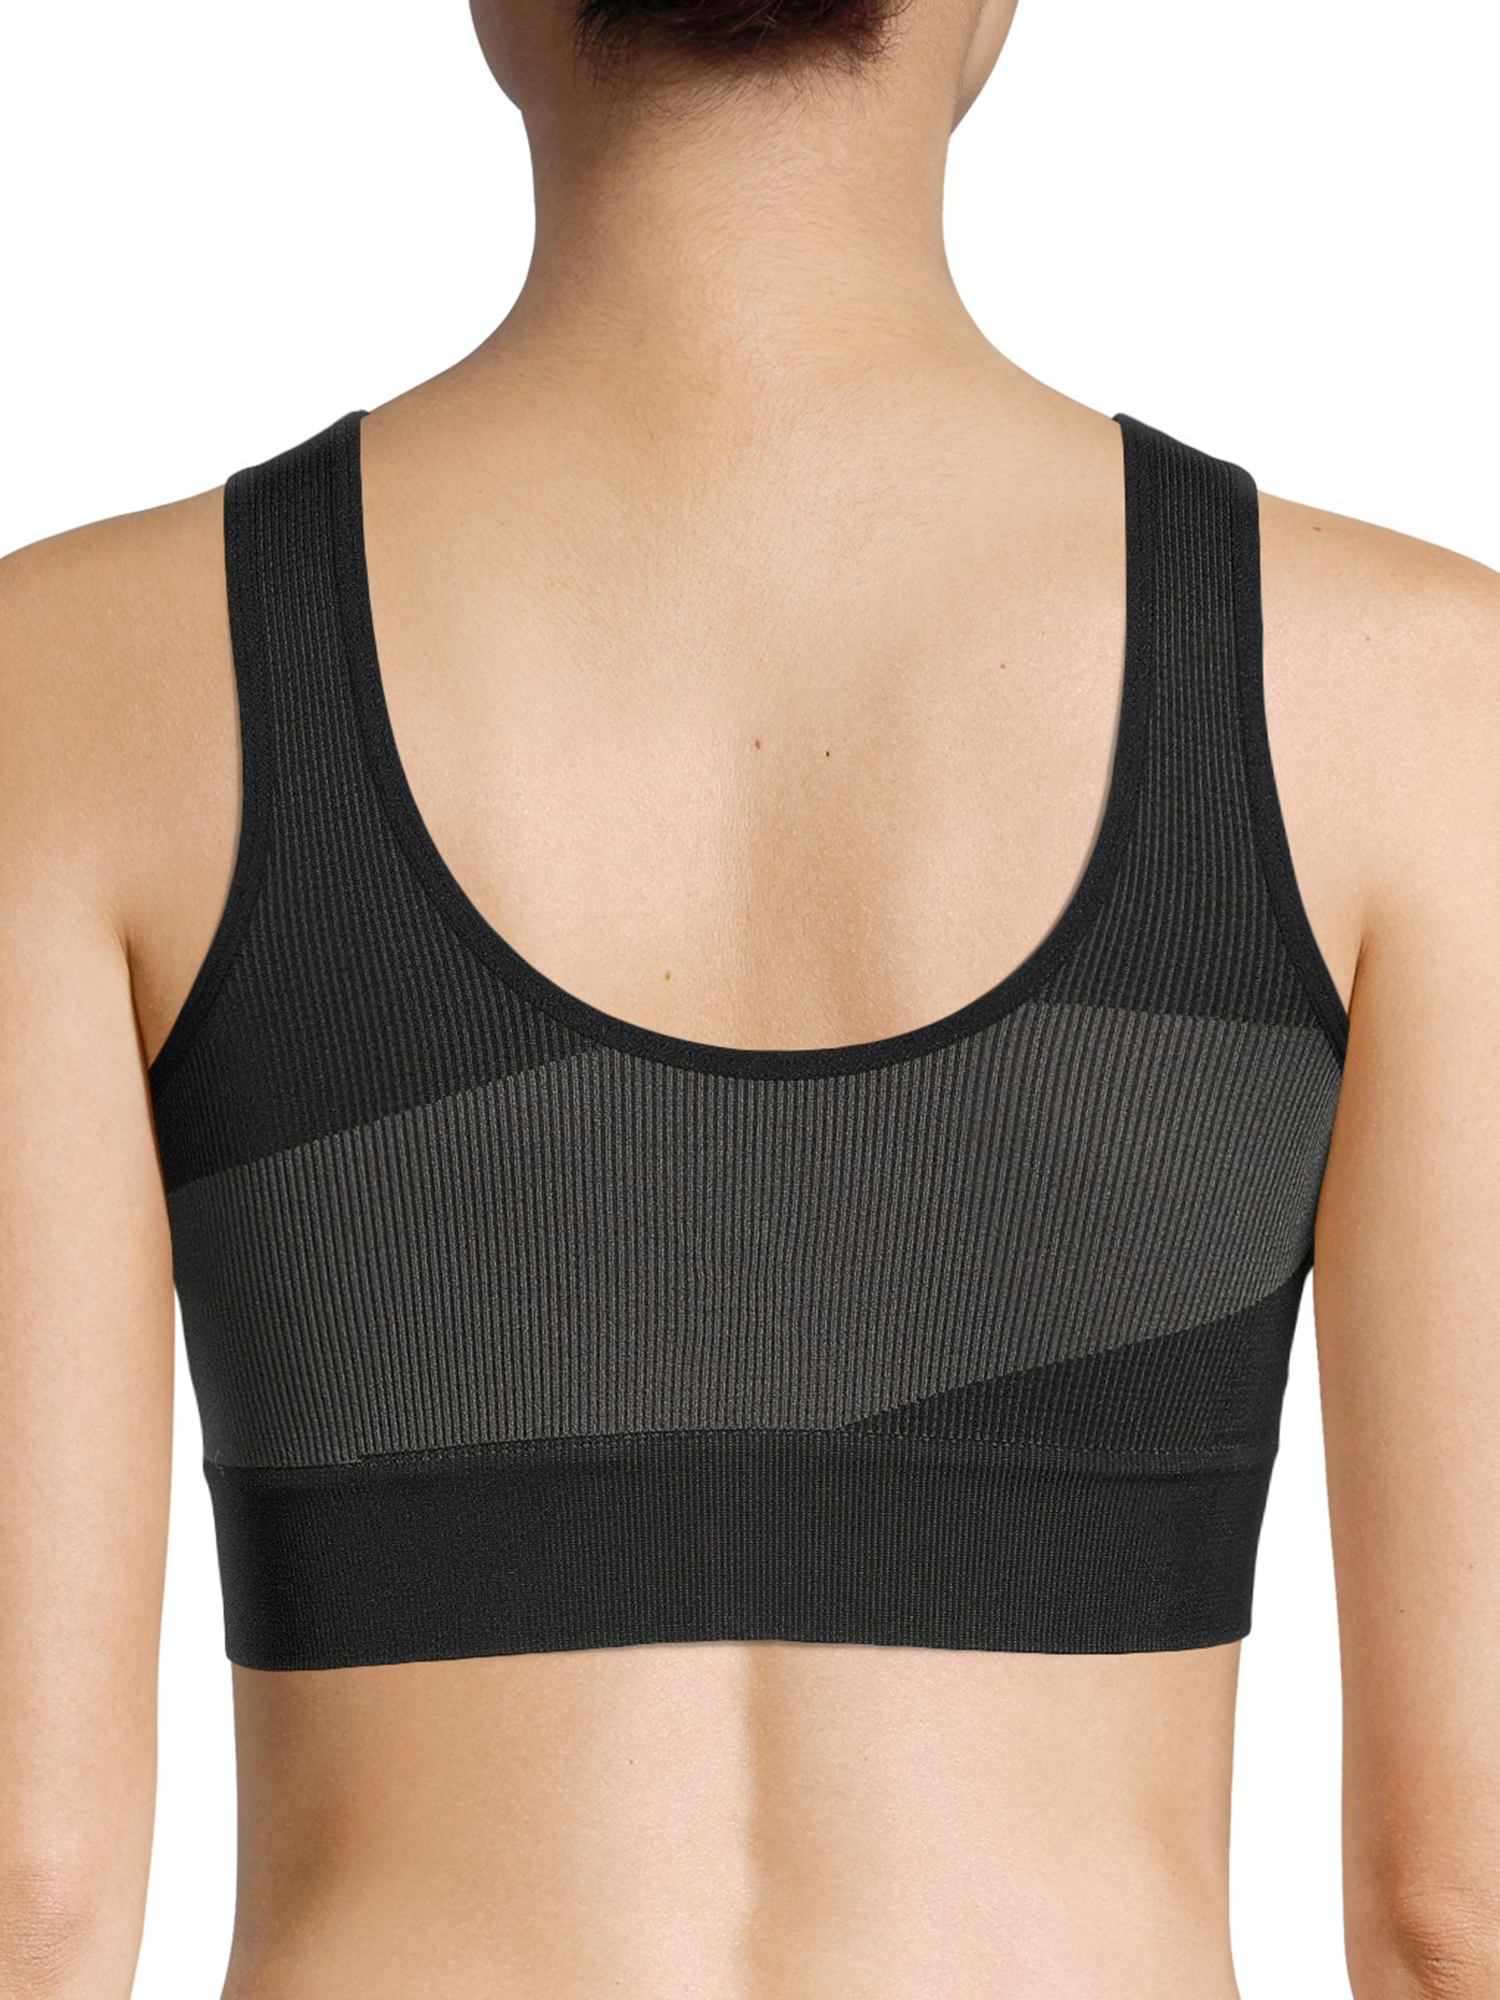 Reebok Women's Stay-Put Bonded Stretch Bralette, 2 Pack - image 3 of 7